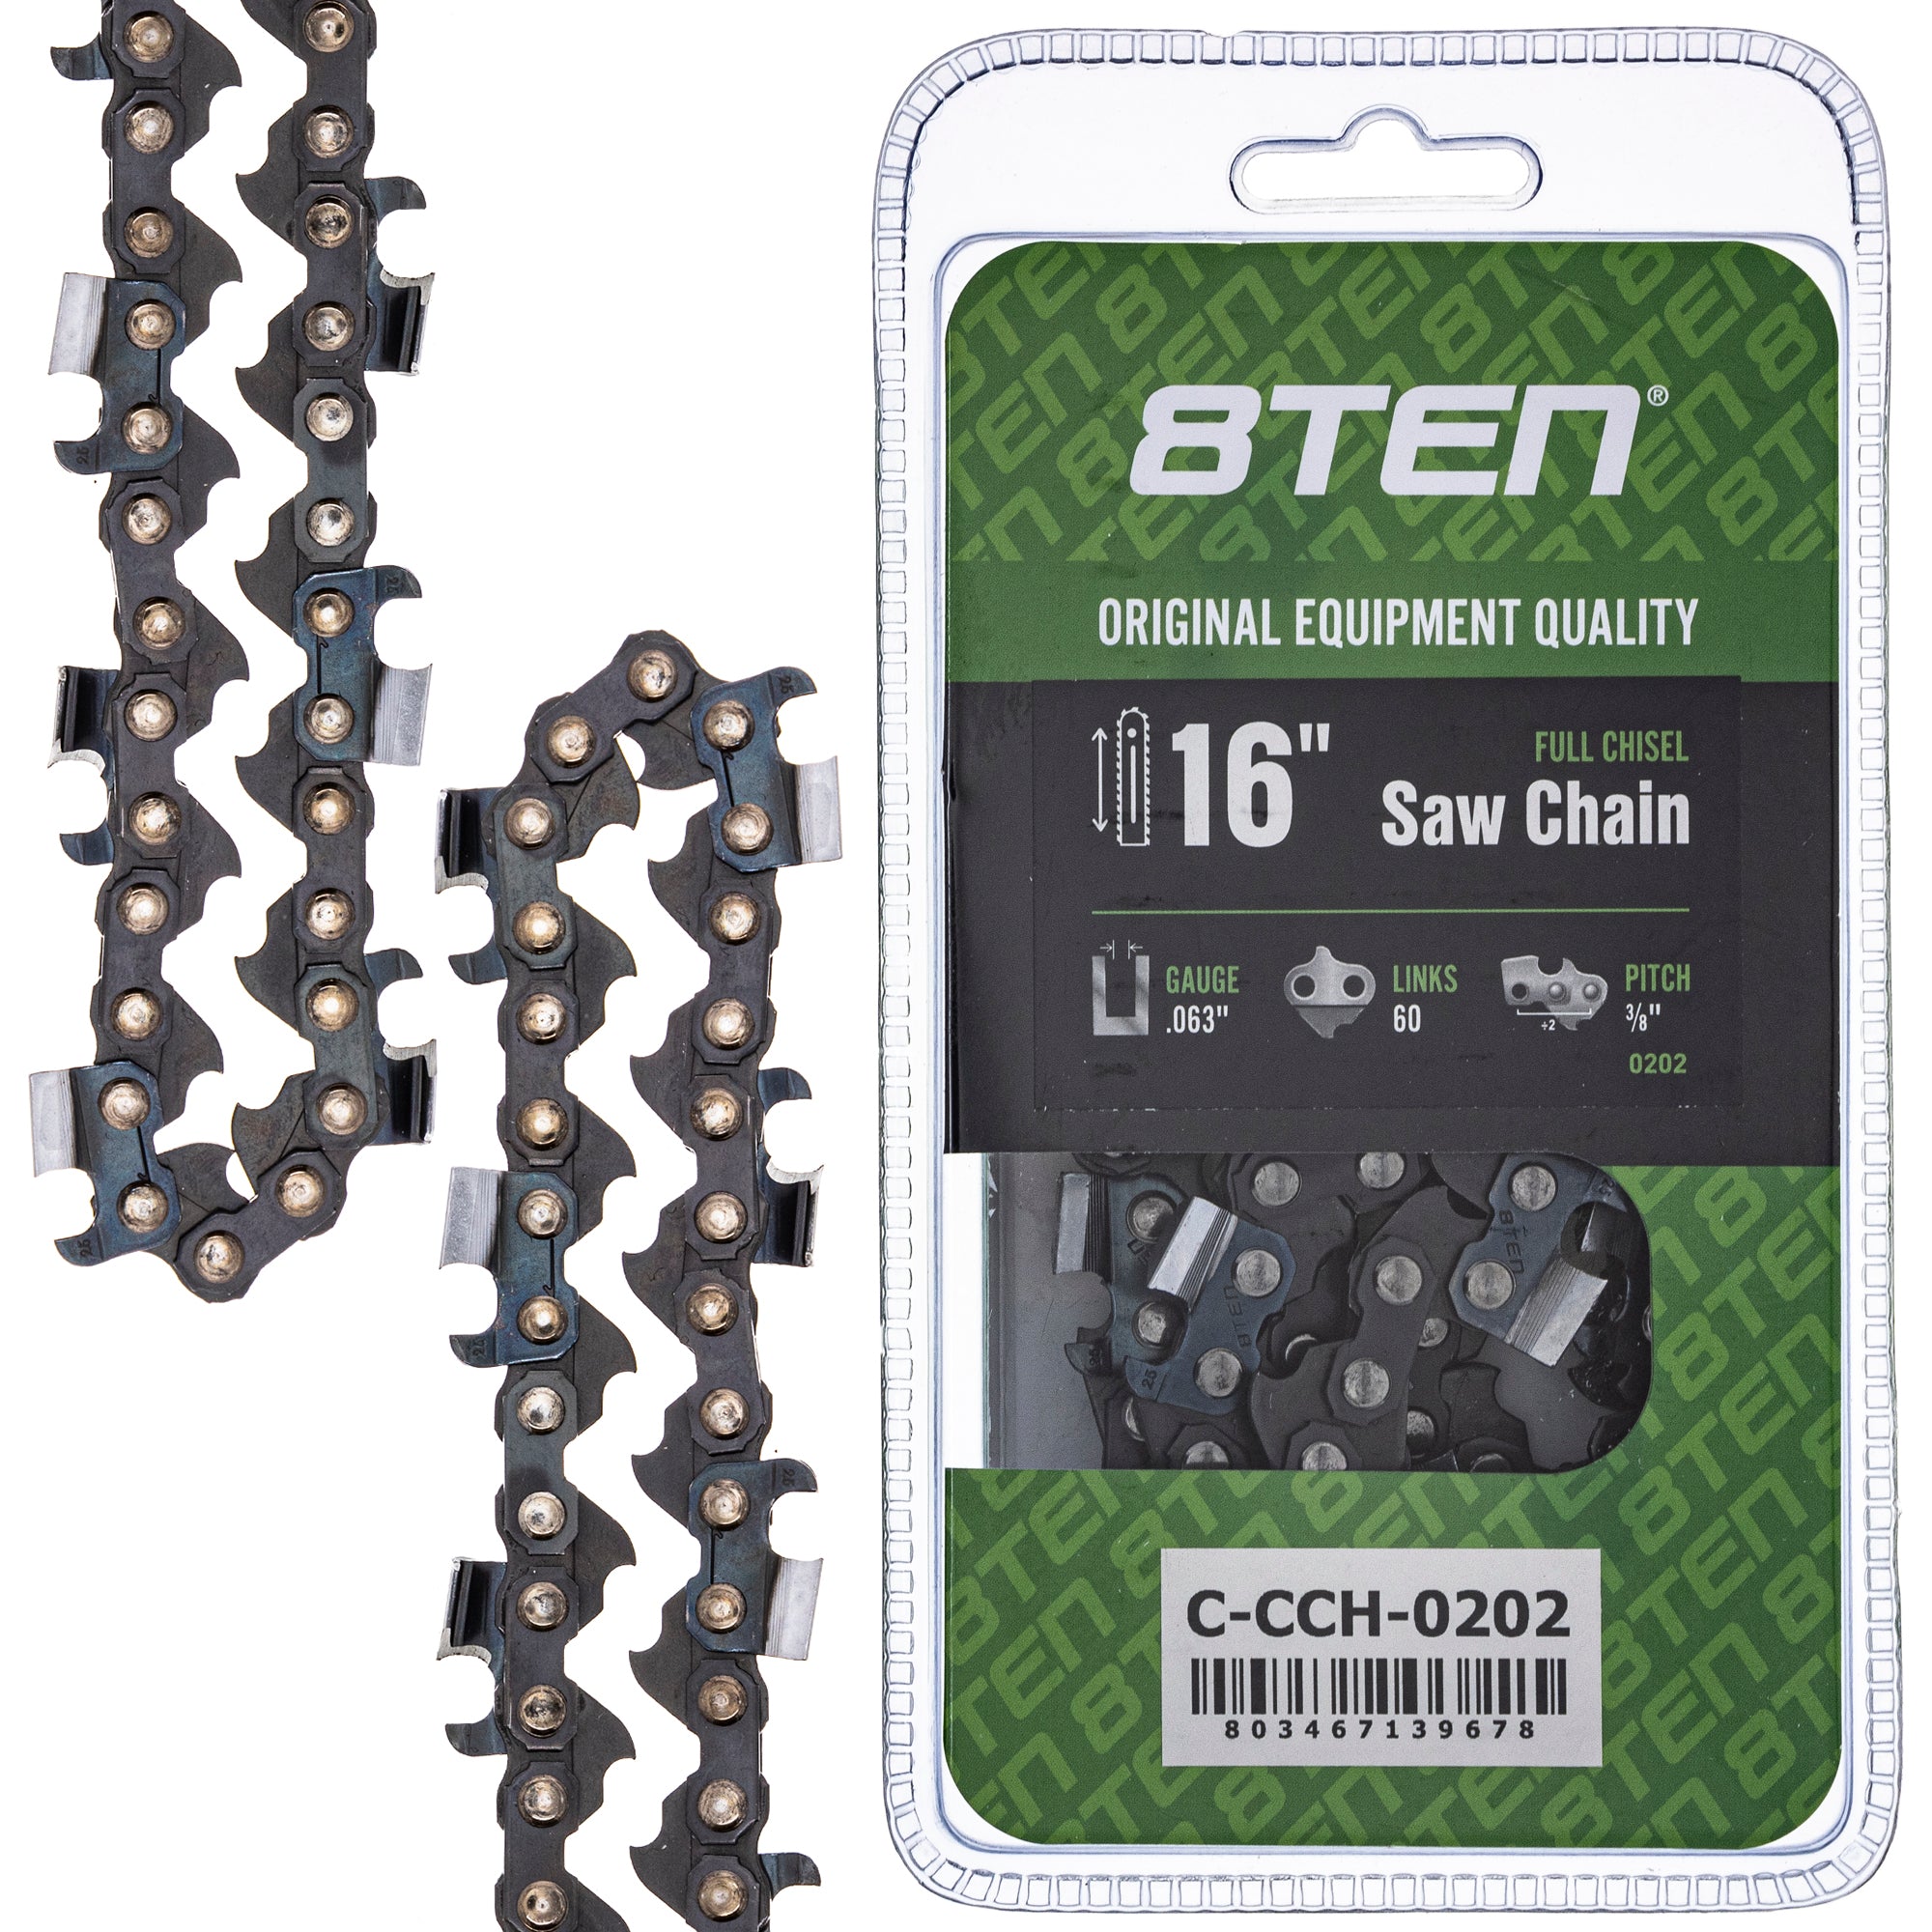 Chainsaw Chain 16 Inch .063 3/8 60DL for MSE MS E 066 8TEN 810-CCC2424H